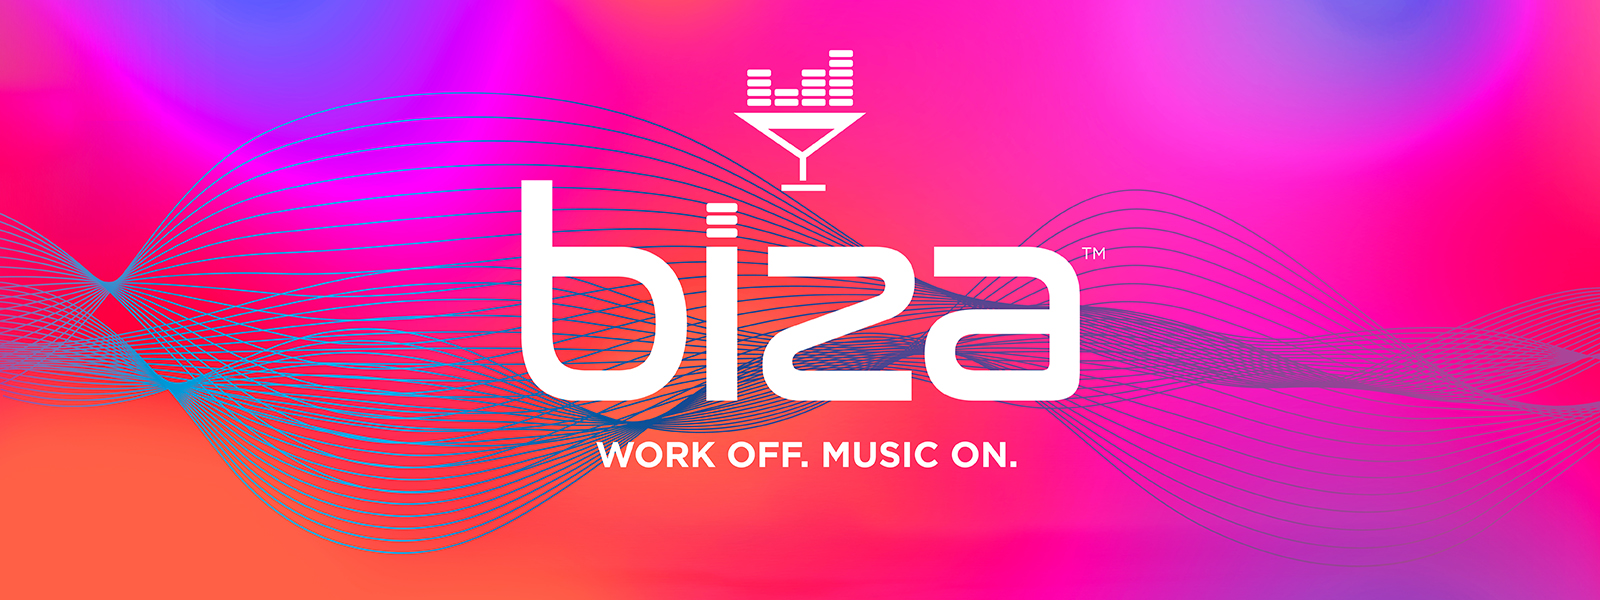 Biza Logo on a color background showing music waves.